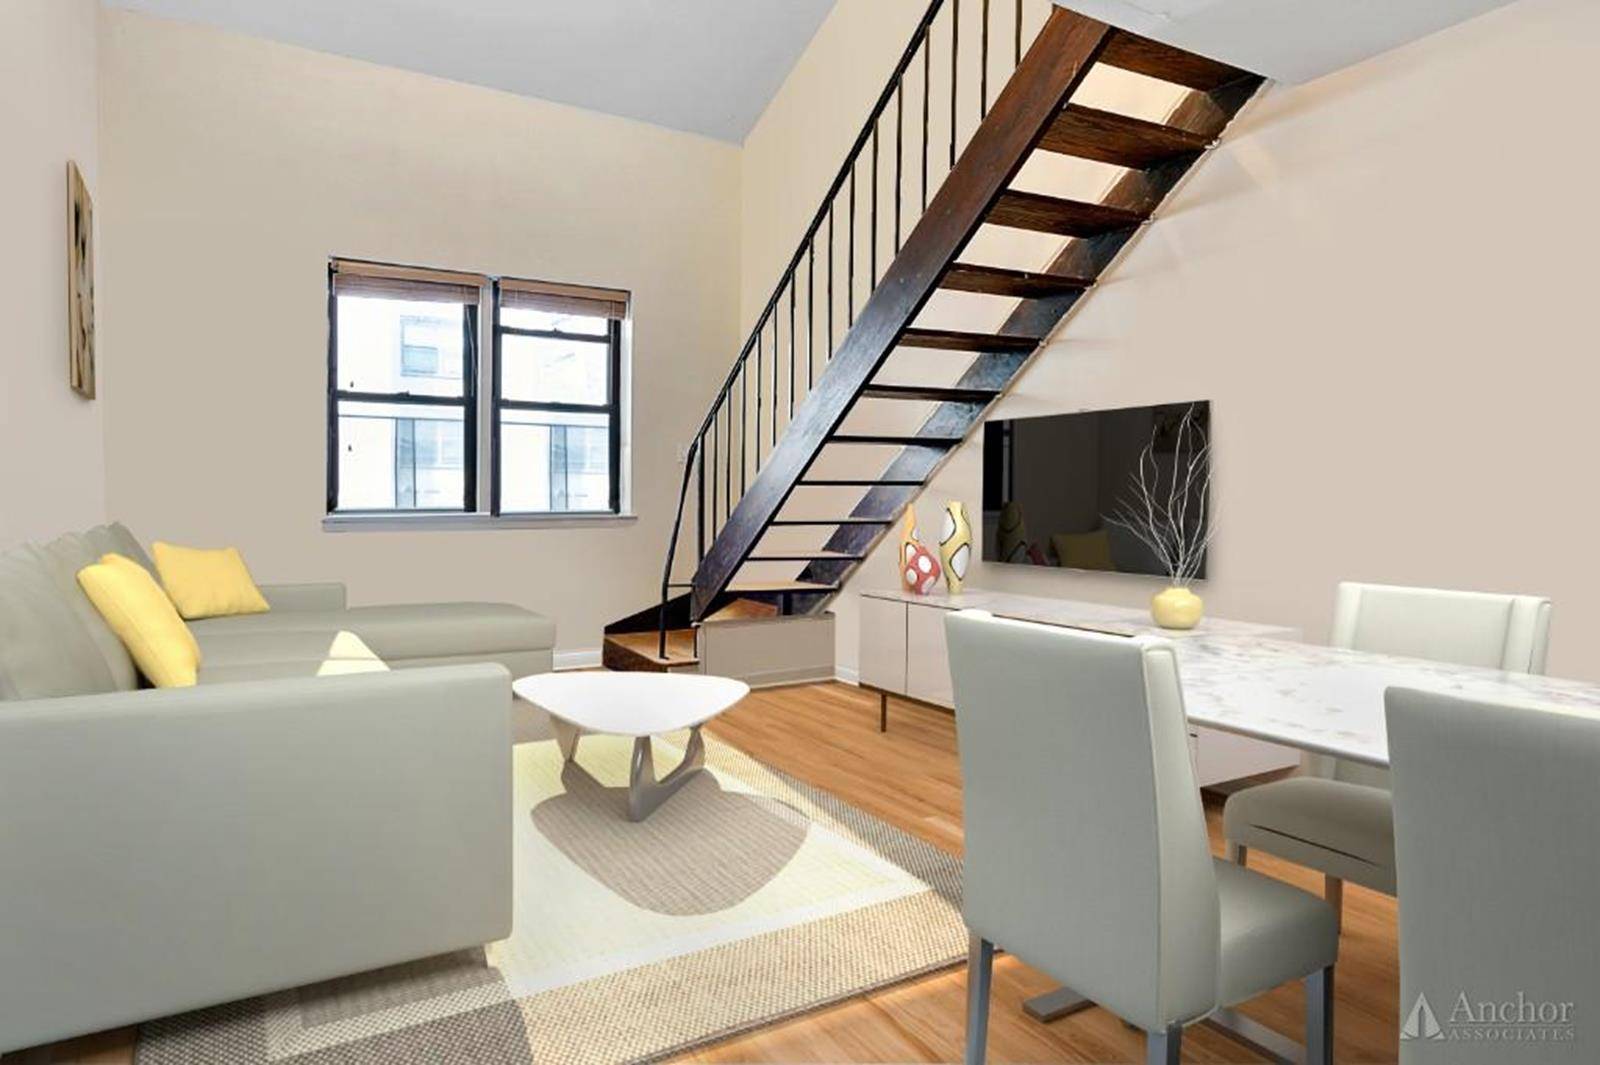 Don't miss out on this beautiful, spacious duplex 1 bedroom in one of NYC's most desired neighborhoods !